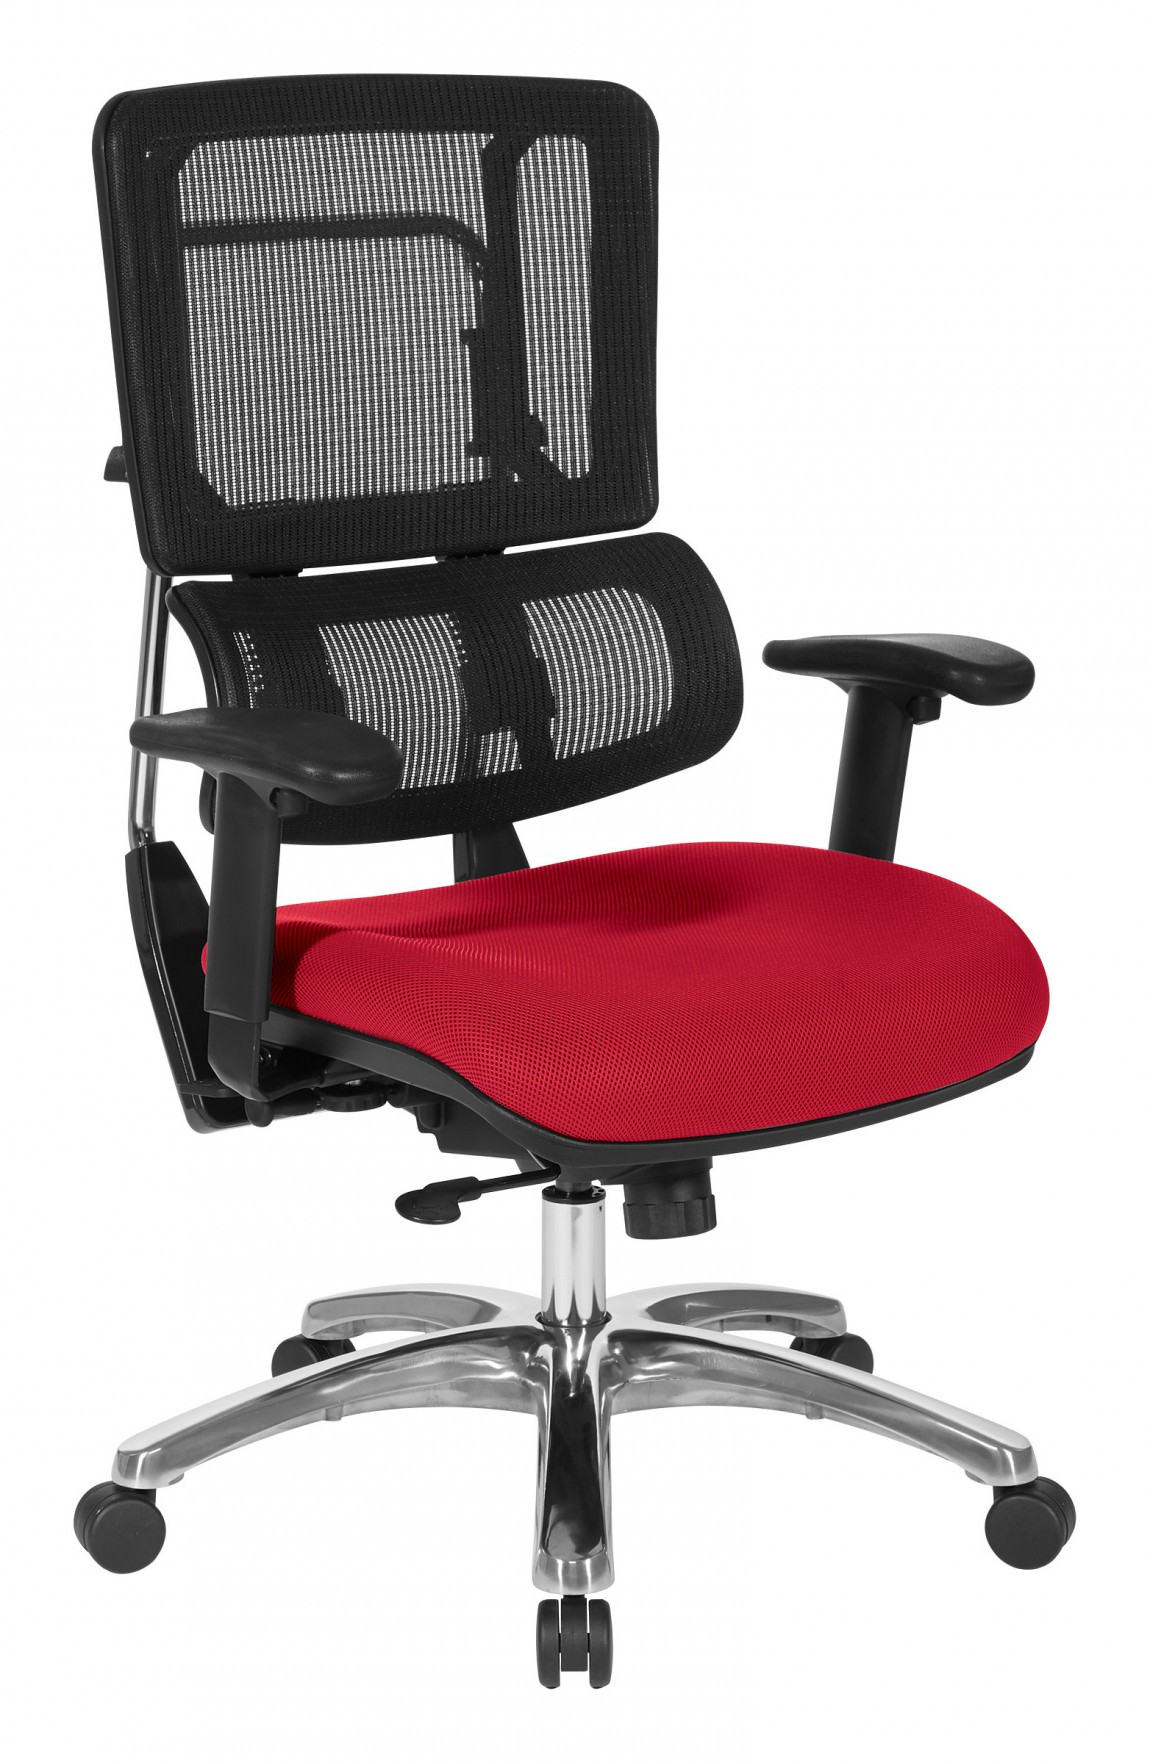 https://madisonliquidators.com/images/p/1150/25895-high-back-office-chair-with-lumbar-support-6.jpg